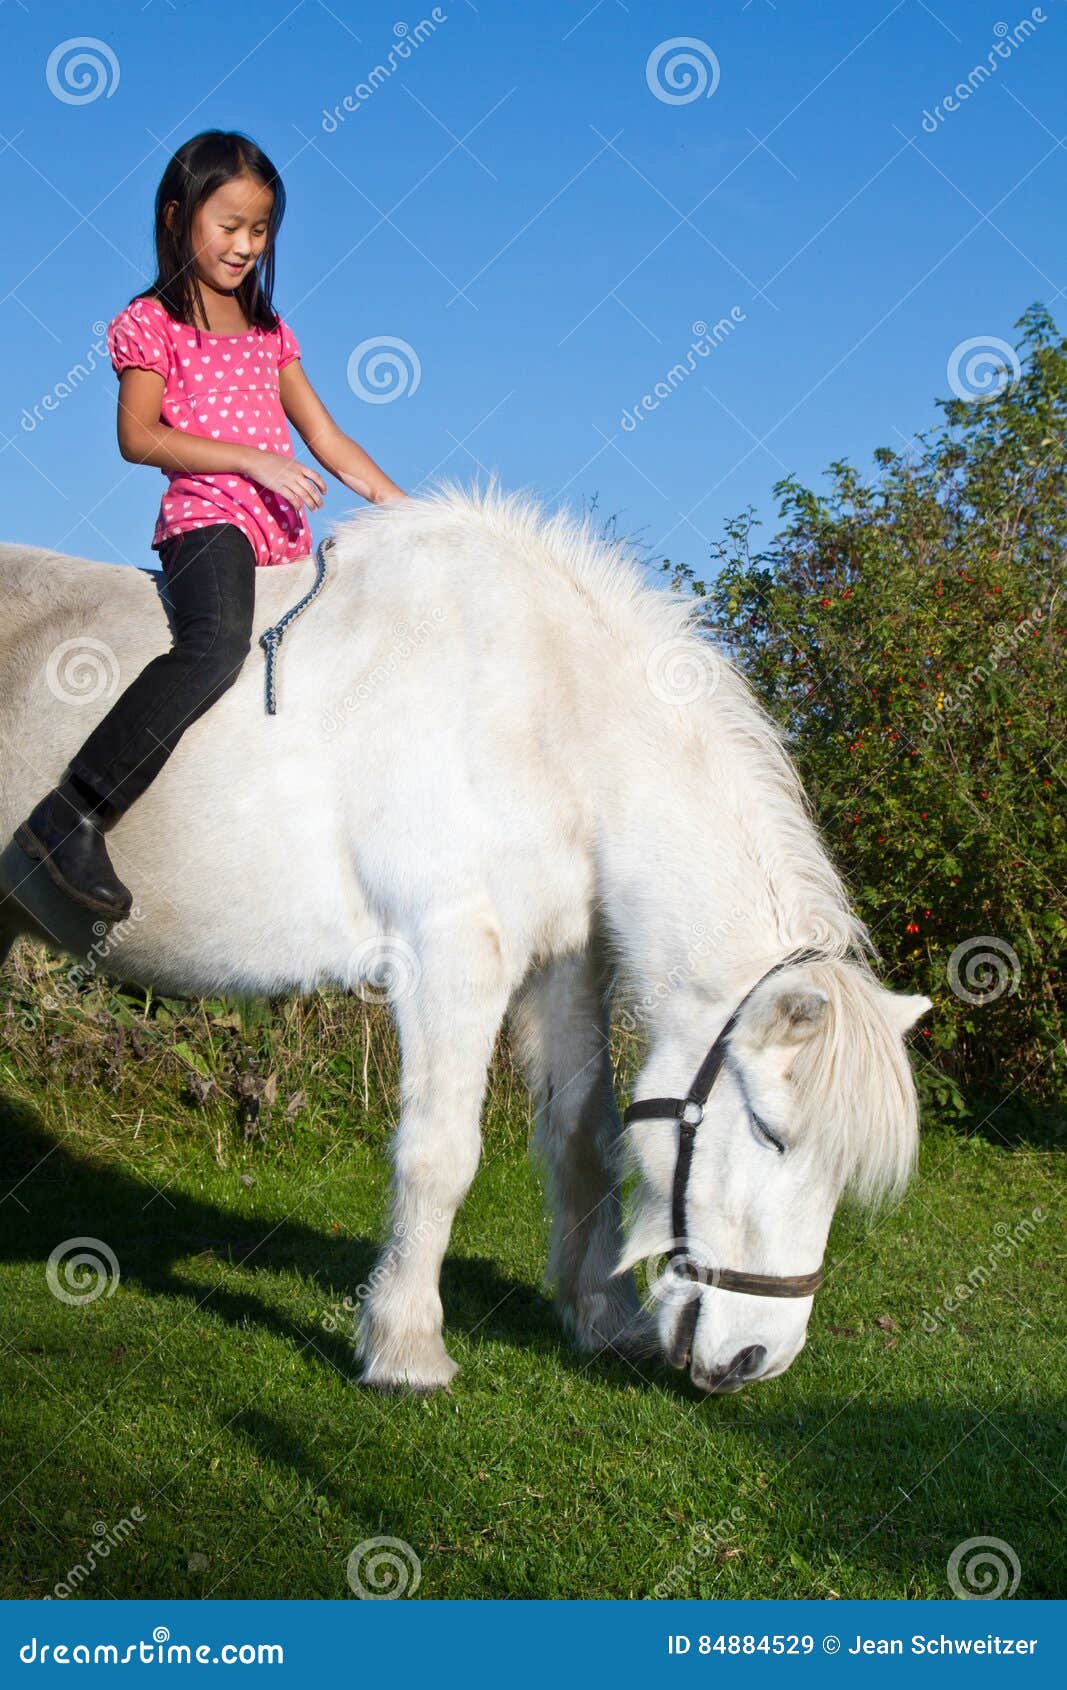 Young Girl Riding